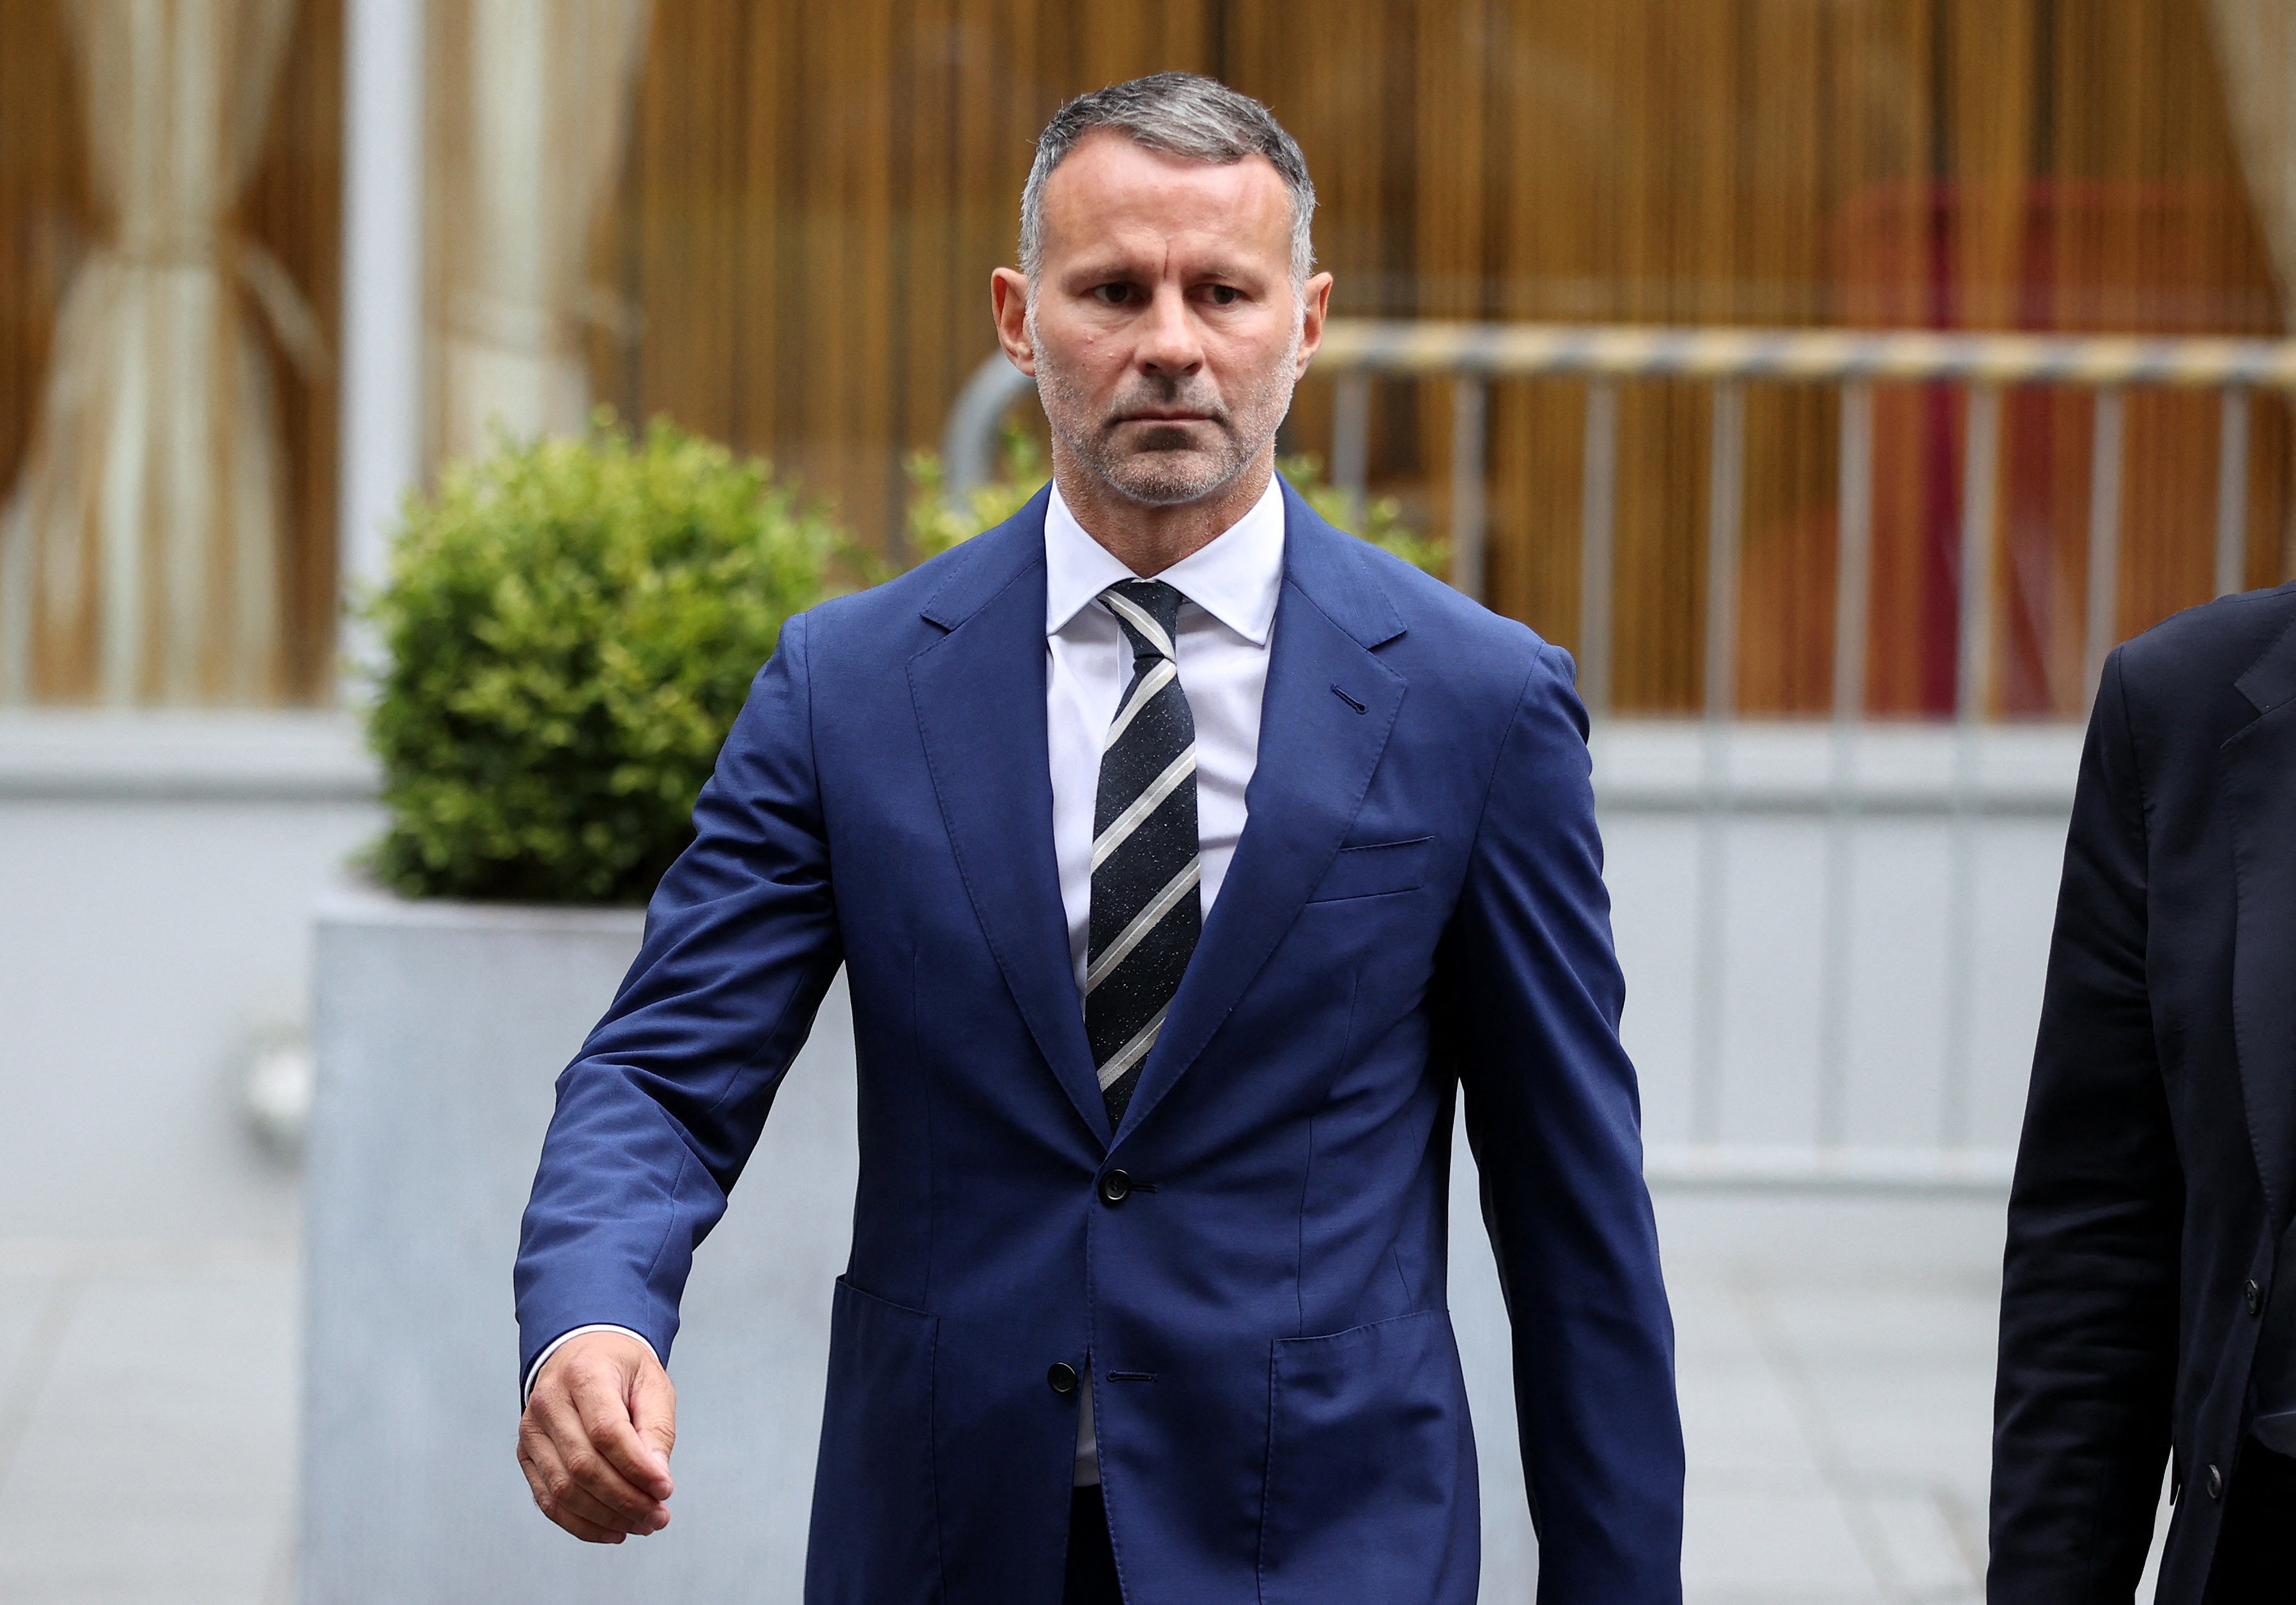 Ryan Giggs arrives at Manchester crown court for another day of cross-examination